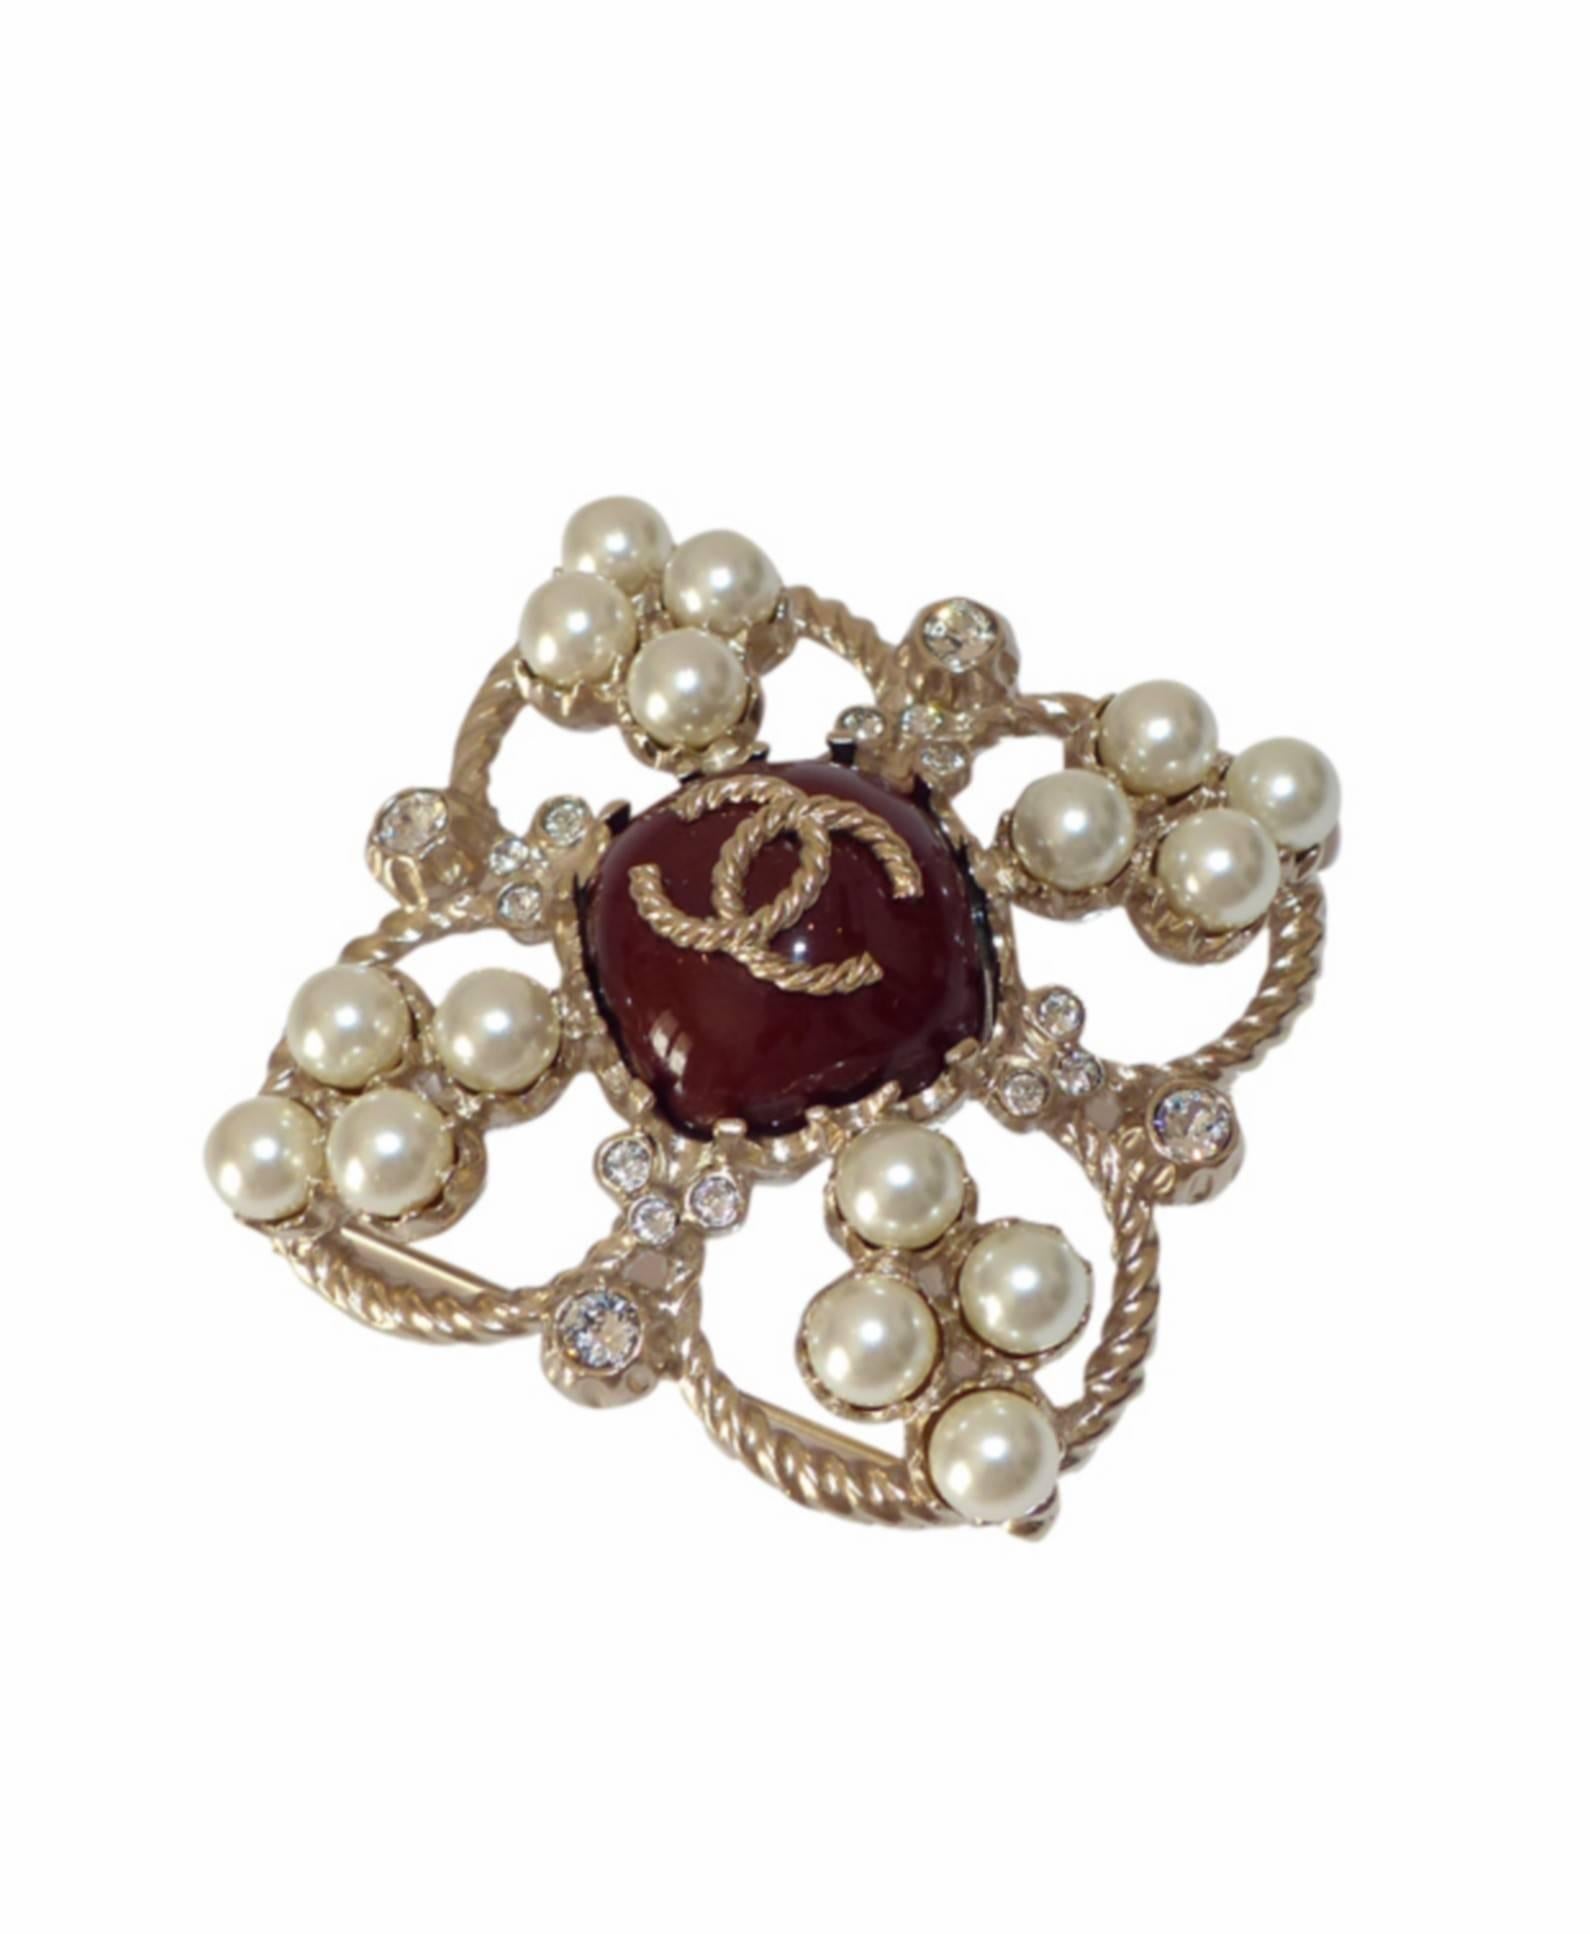 Very beautiful Chanel brooch in brushed twisted metal set with pearls and rhinestones.
Collection Paris Edinburgh
Burgundy central stone and golden metallic CC logo.
Signature on the back
Excellente Condition 
Delivered with its Chanel